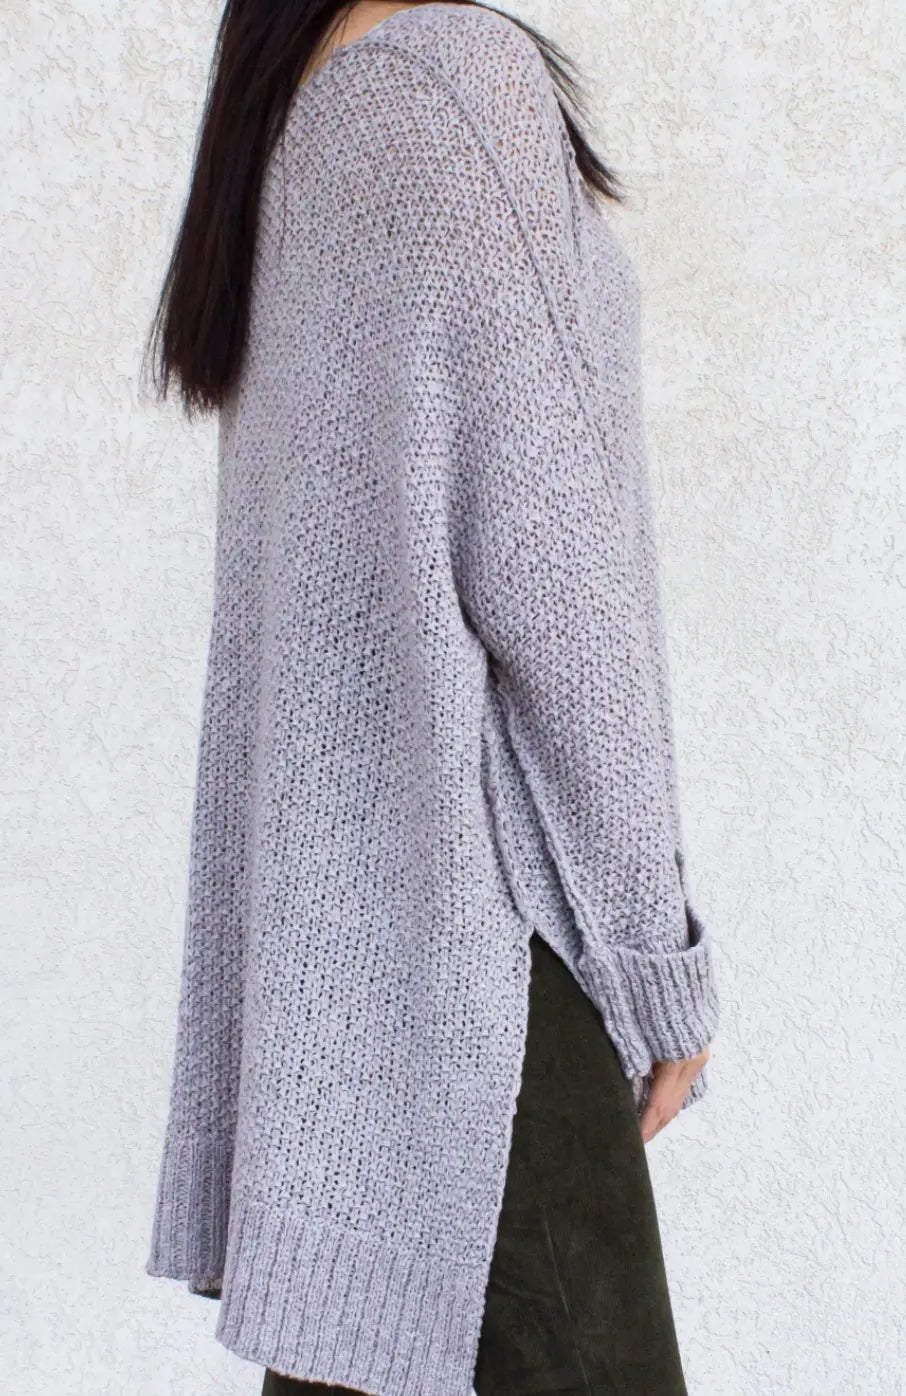 Top Sweater 3/4 Slv Pullover - Bay-Tique